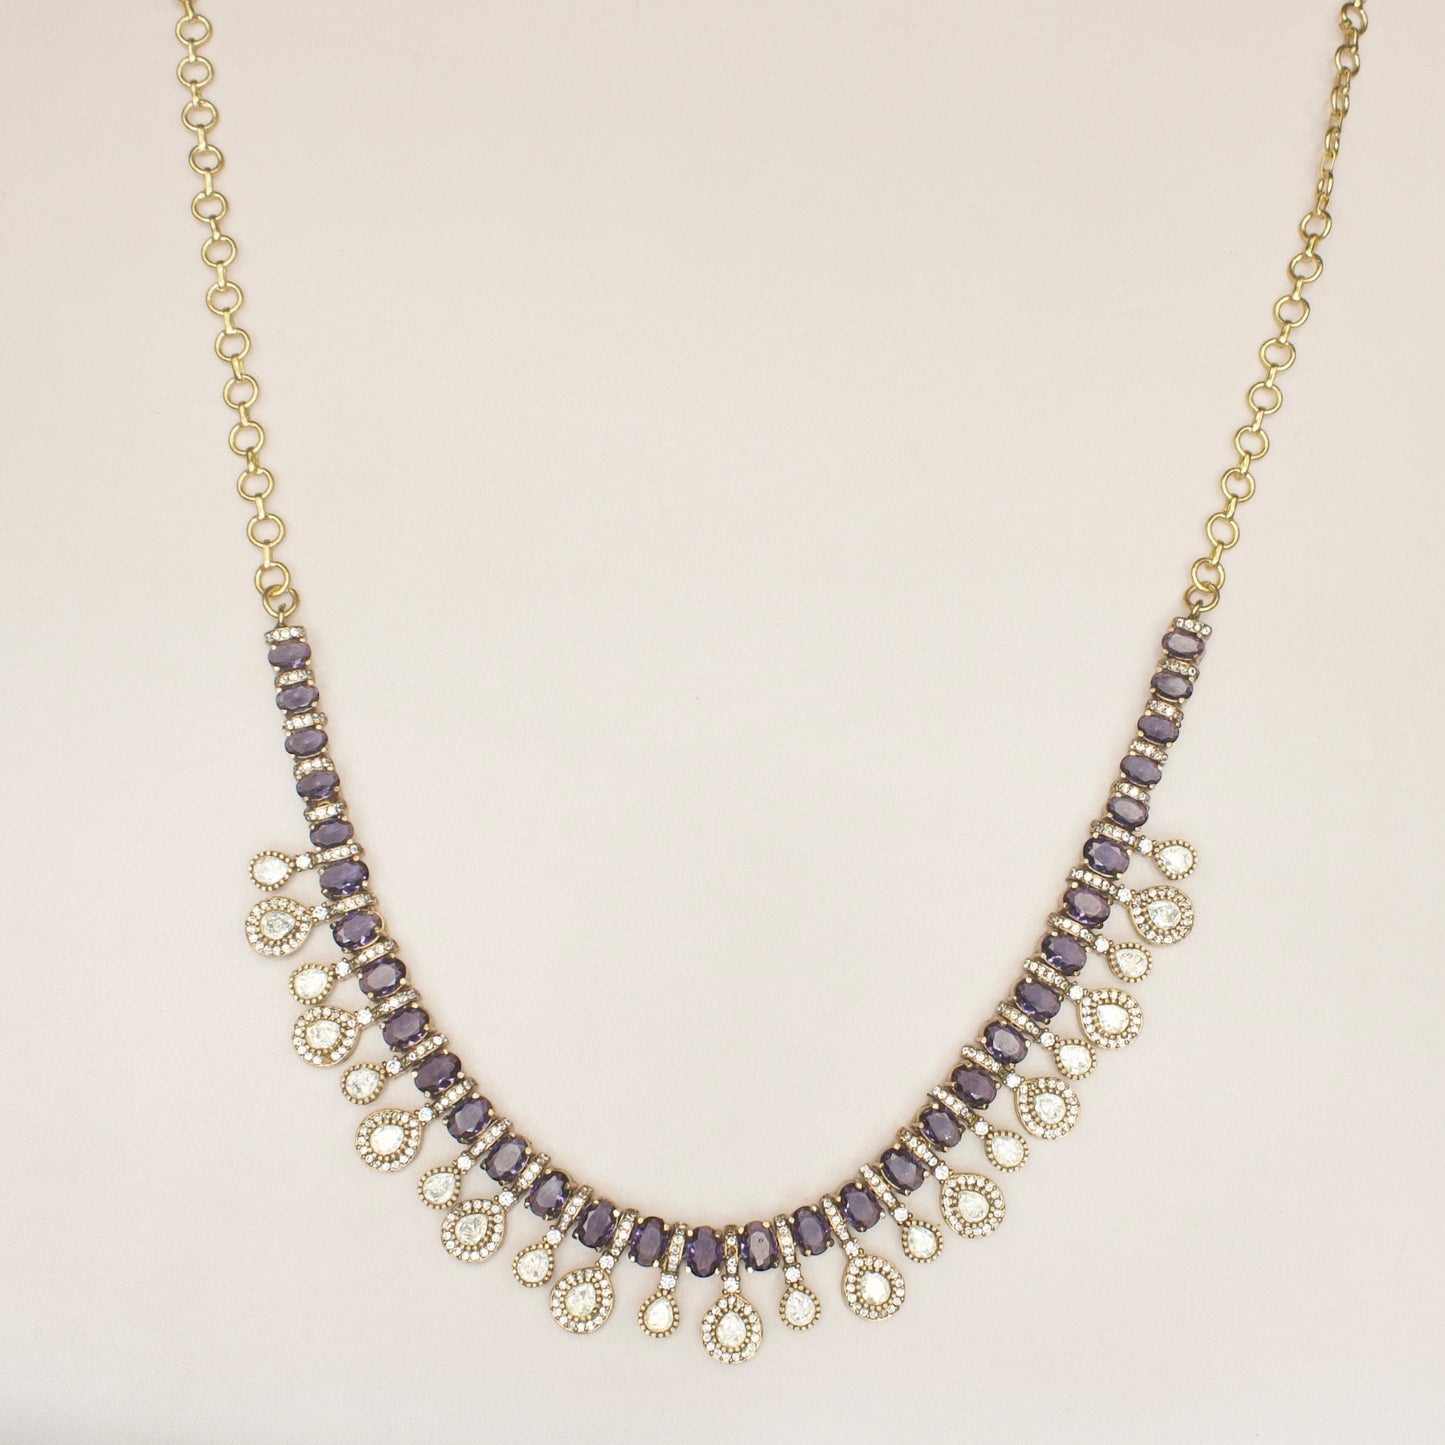 Trending One-Line Victorian Necklace Set with drop earrings